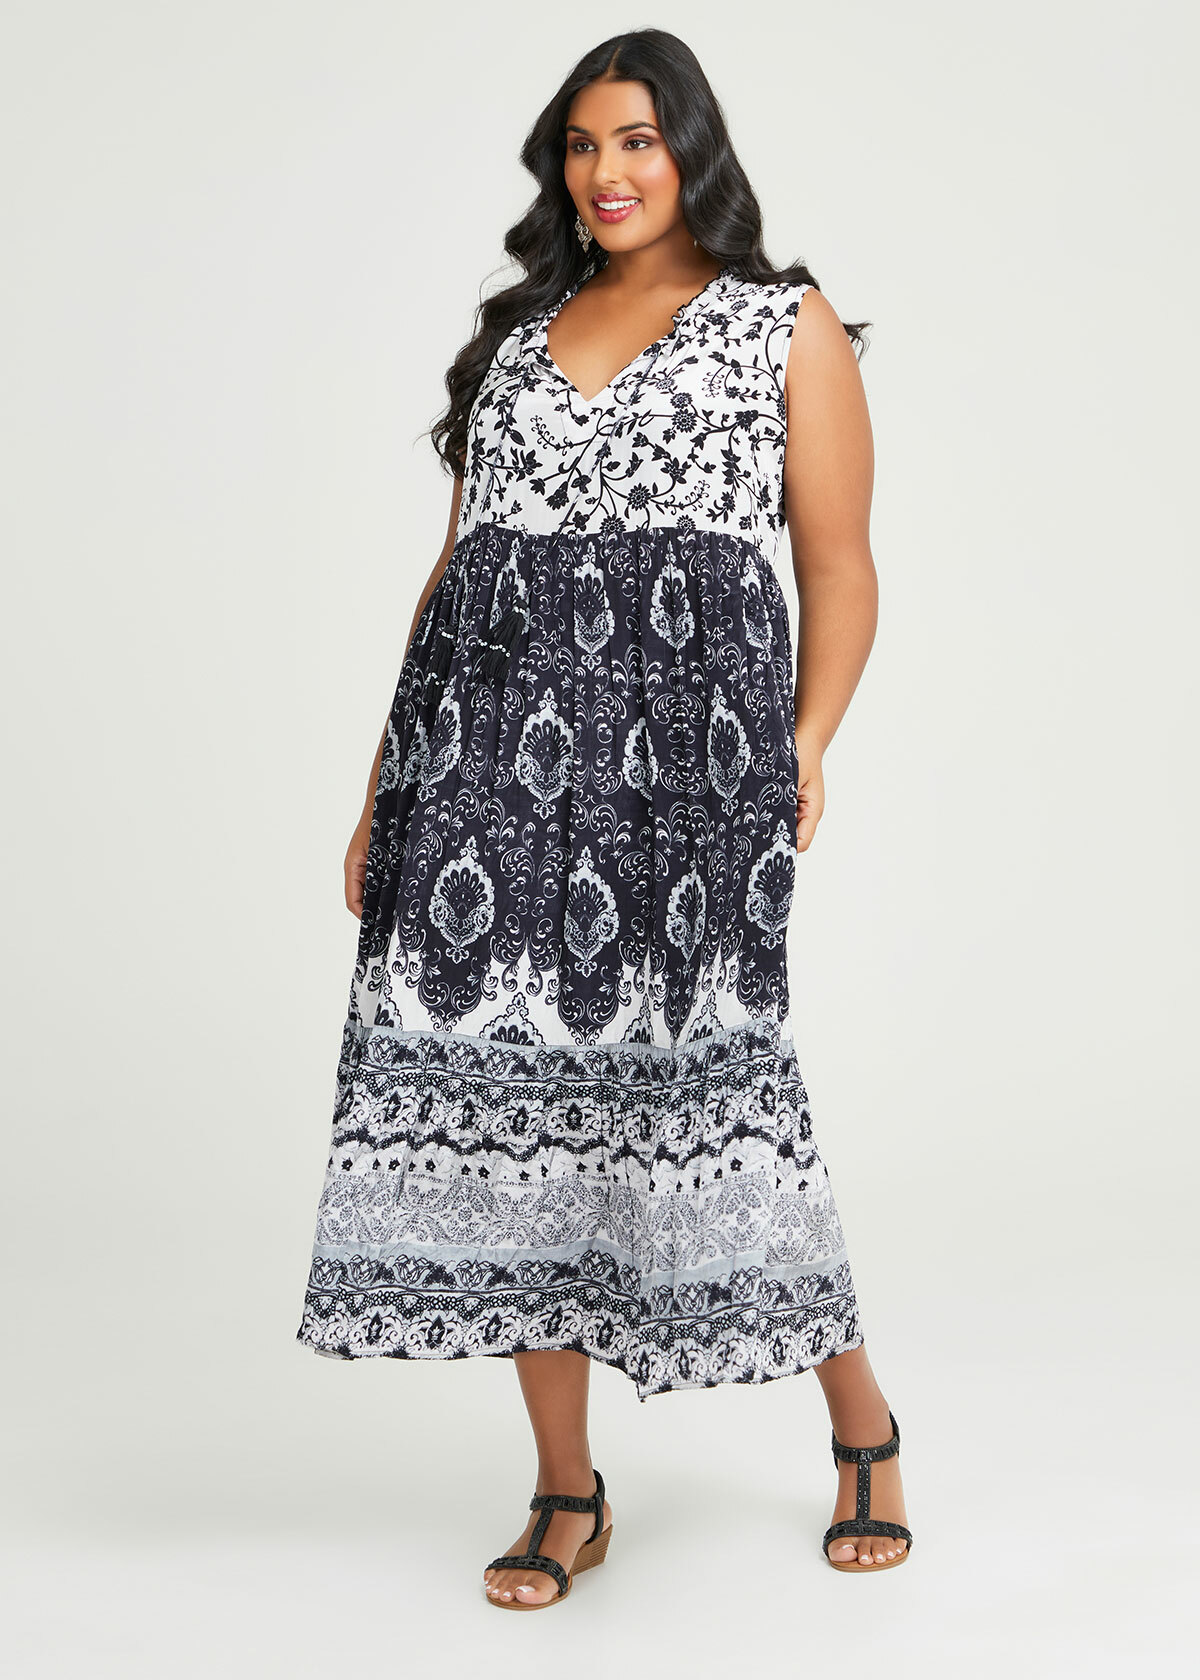 Shop Plus Size Natural Botanica Tiered Dress in Multi | Sizes 12-30 ...